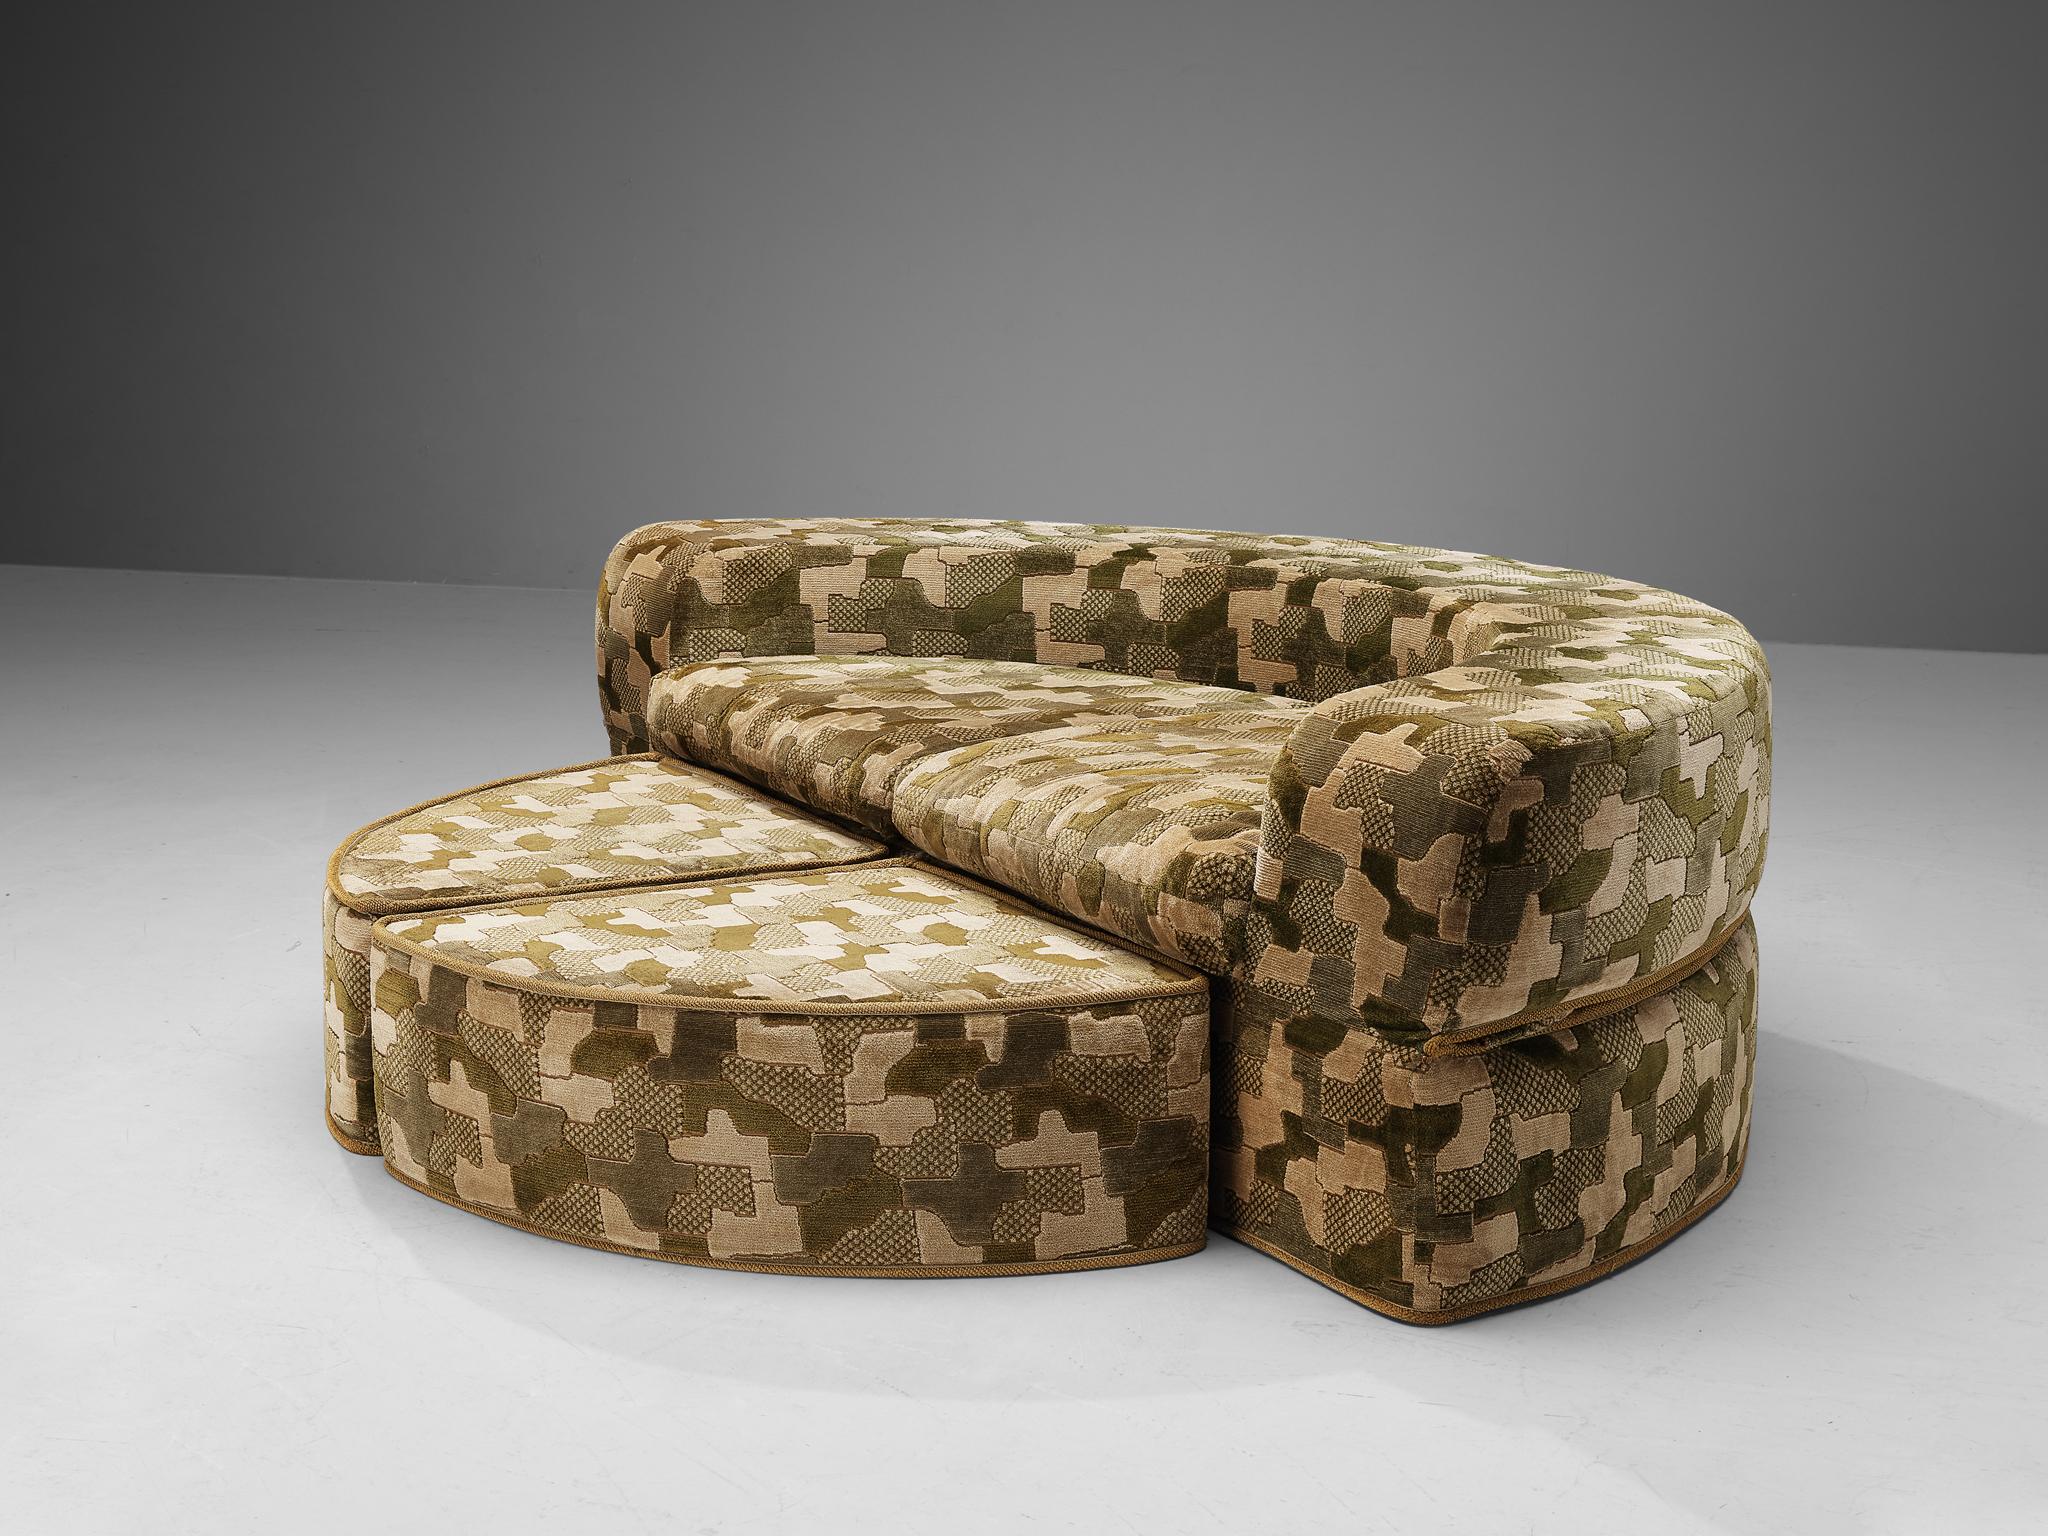 Fabric Italian Sofa Transformable to Bed in Patterned Velvet Upholstery